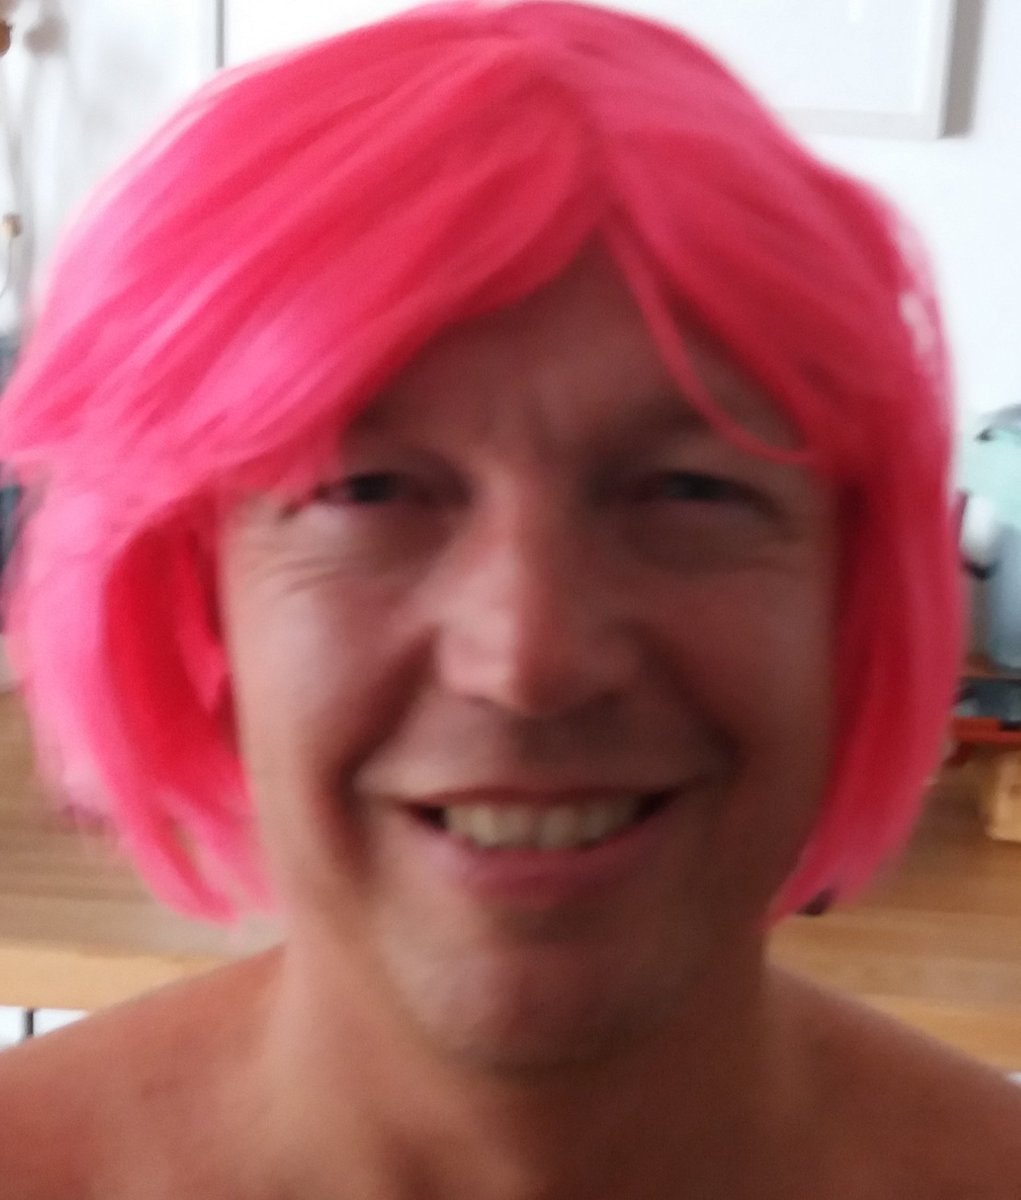 A personal thread on  #Covid19UK and the  #cancercrisis:I am 52. I am waiting for my third brain tumour operation since 2014. Here’s me in the wig my daughters kindly lent me after shaving my head for the second op’. 1/6